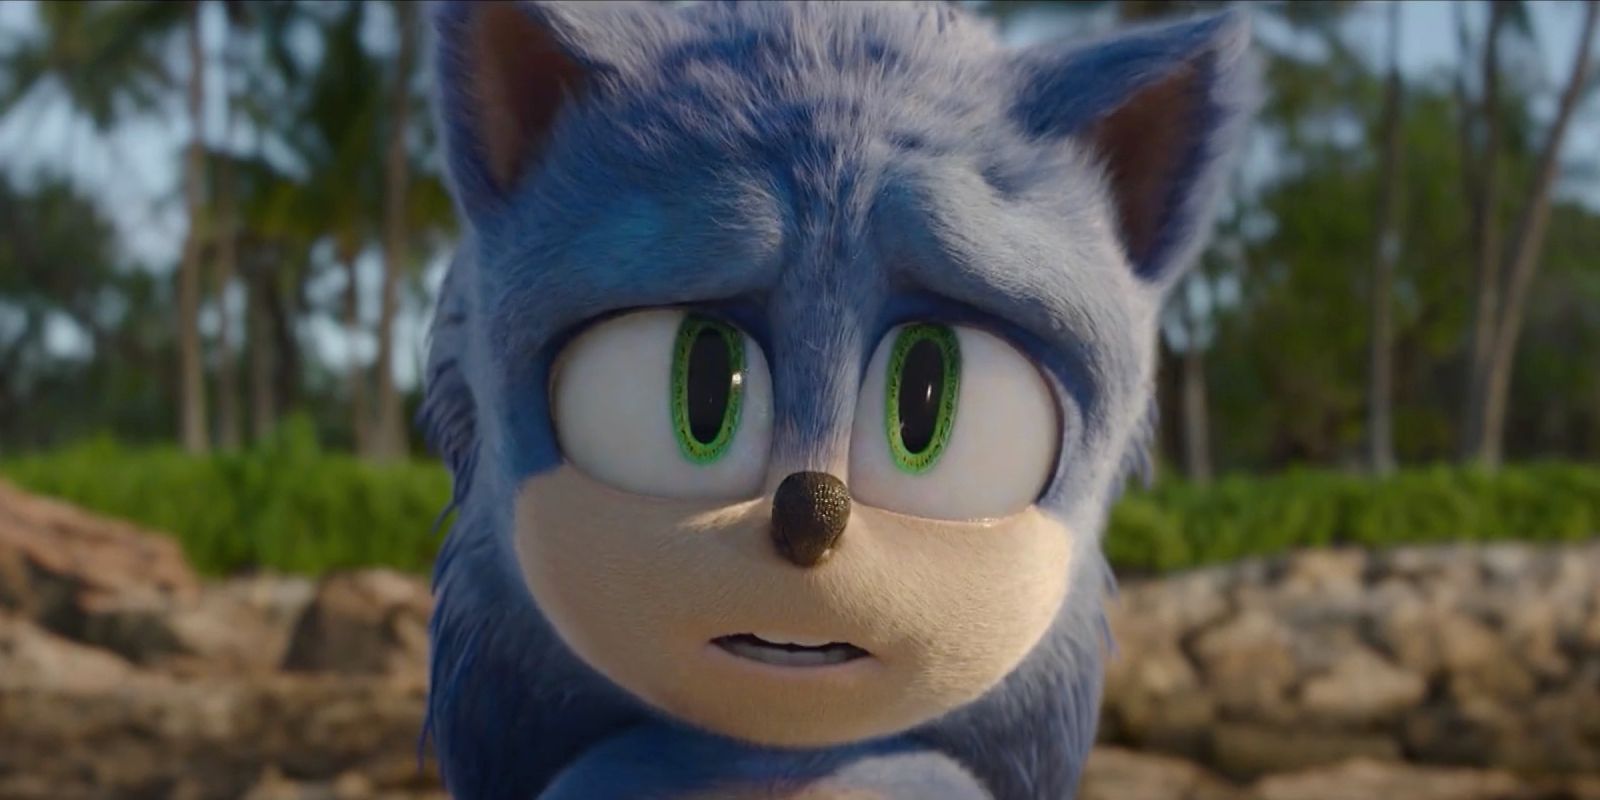 Sonic The Hedgehog 3 Now Has A Lot Of Pressure On It To Smash Sonic 2’s $405M Box Office